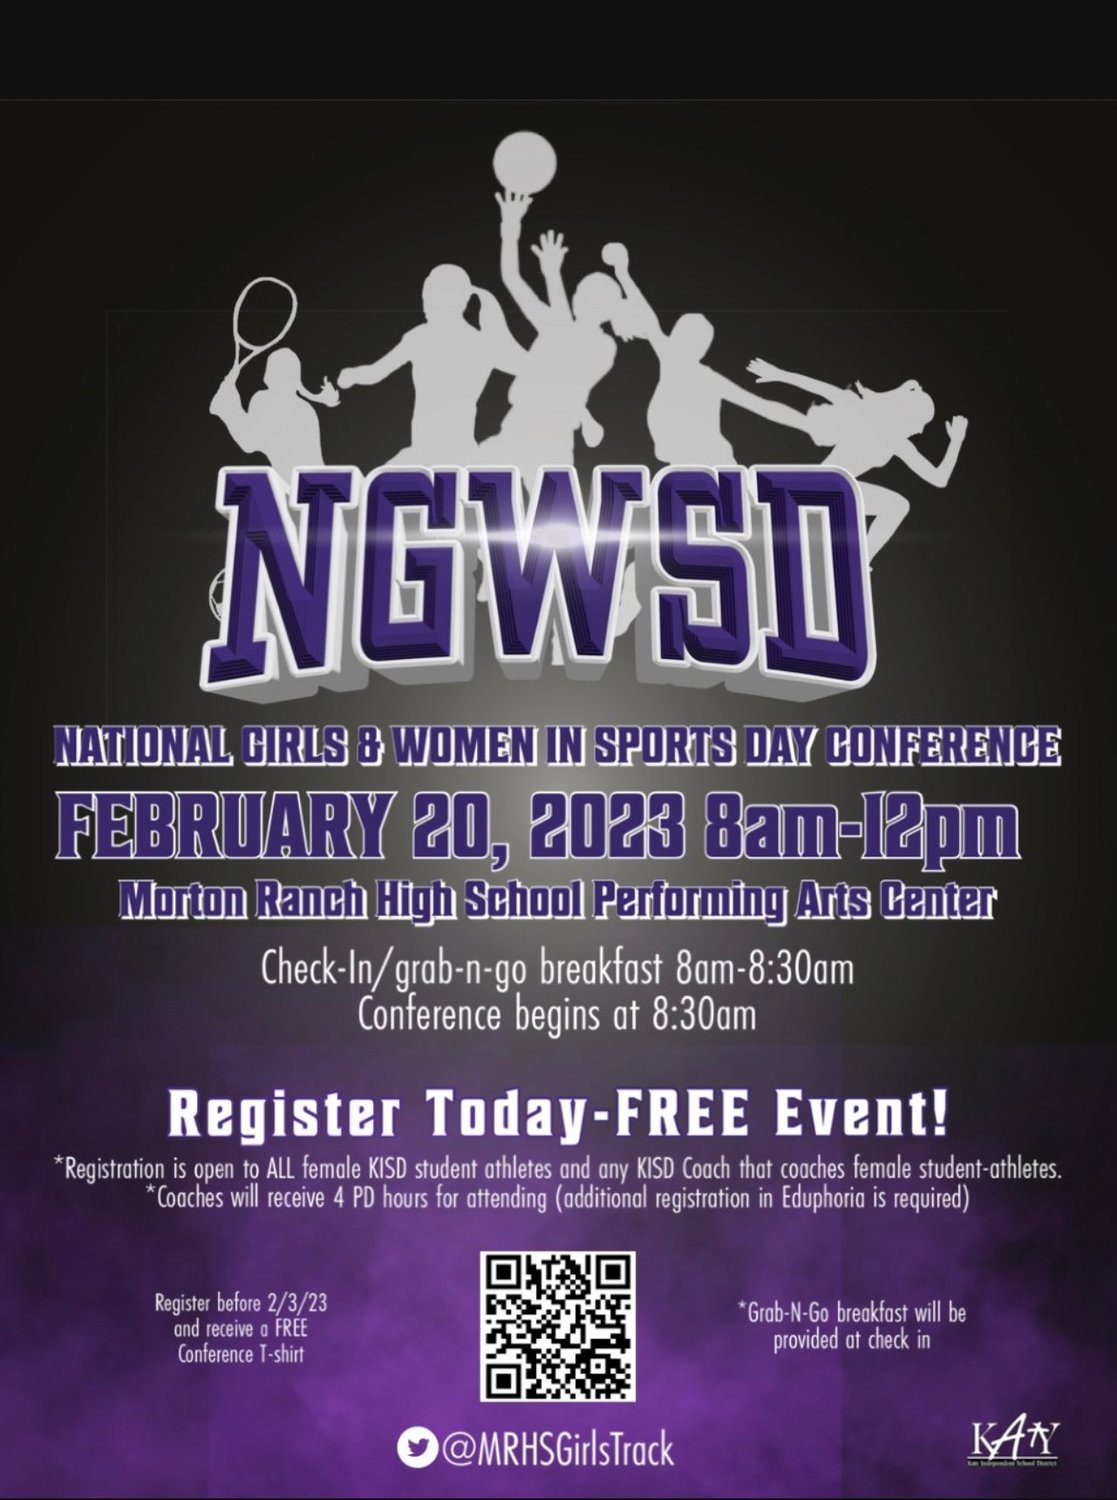 Morton Ranch is hosting its second National Girls and Women in Sports Day Conference on Feb. 20.